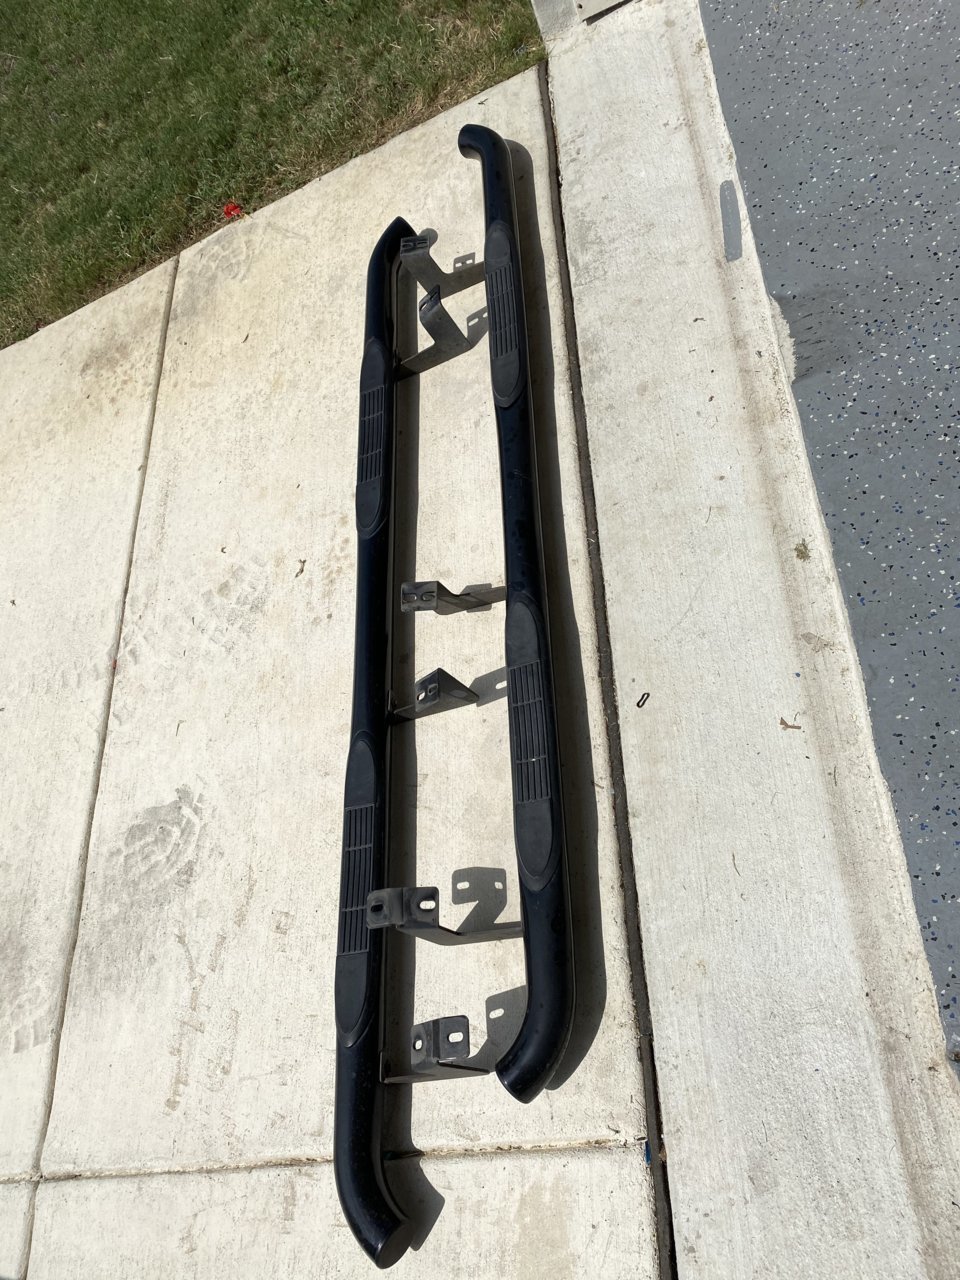 2014+ Toyota Tundra double cab running boards | Toyota Tundra Forum Running Boards For 2014 Toyota Tundra Double Cab